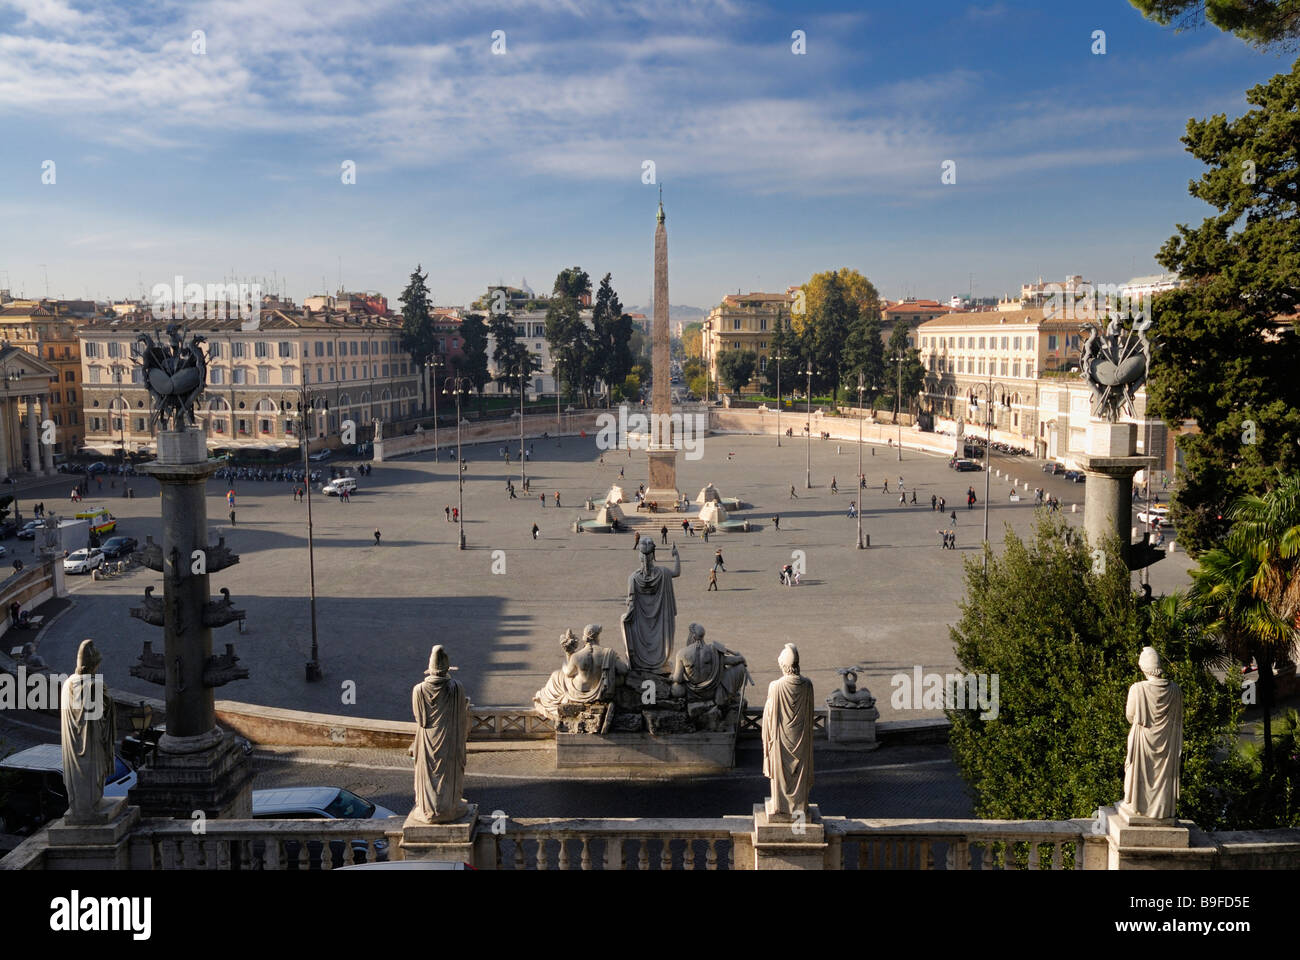 Aerial view of people at town square, Latium, Piazza Del Popolo, Rome, Italy Stock Photo